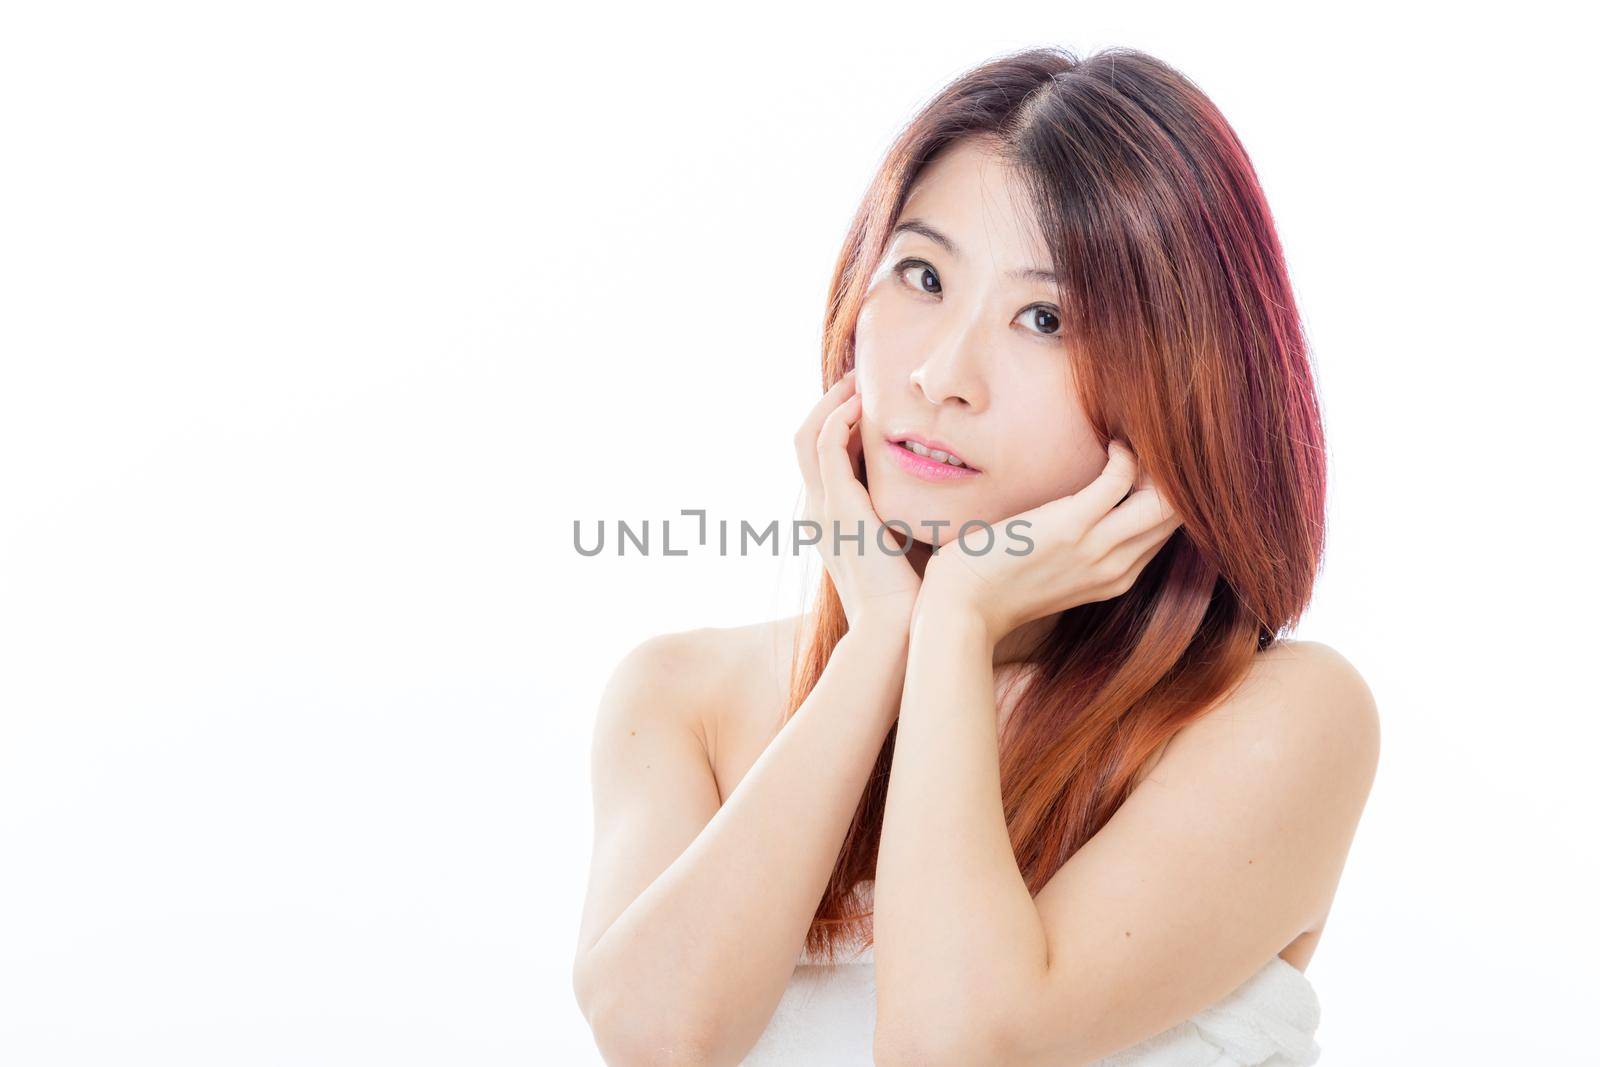 Chinese American woman wearing a white towel, beauty concept by imagesbykenny